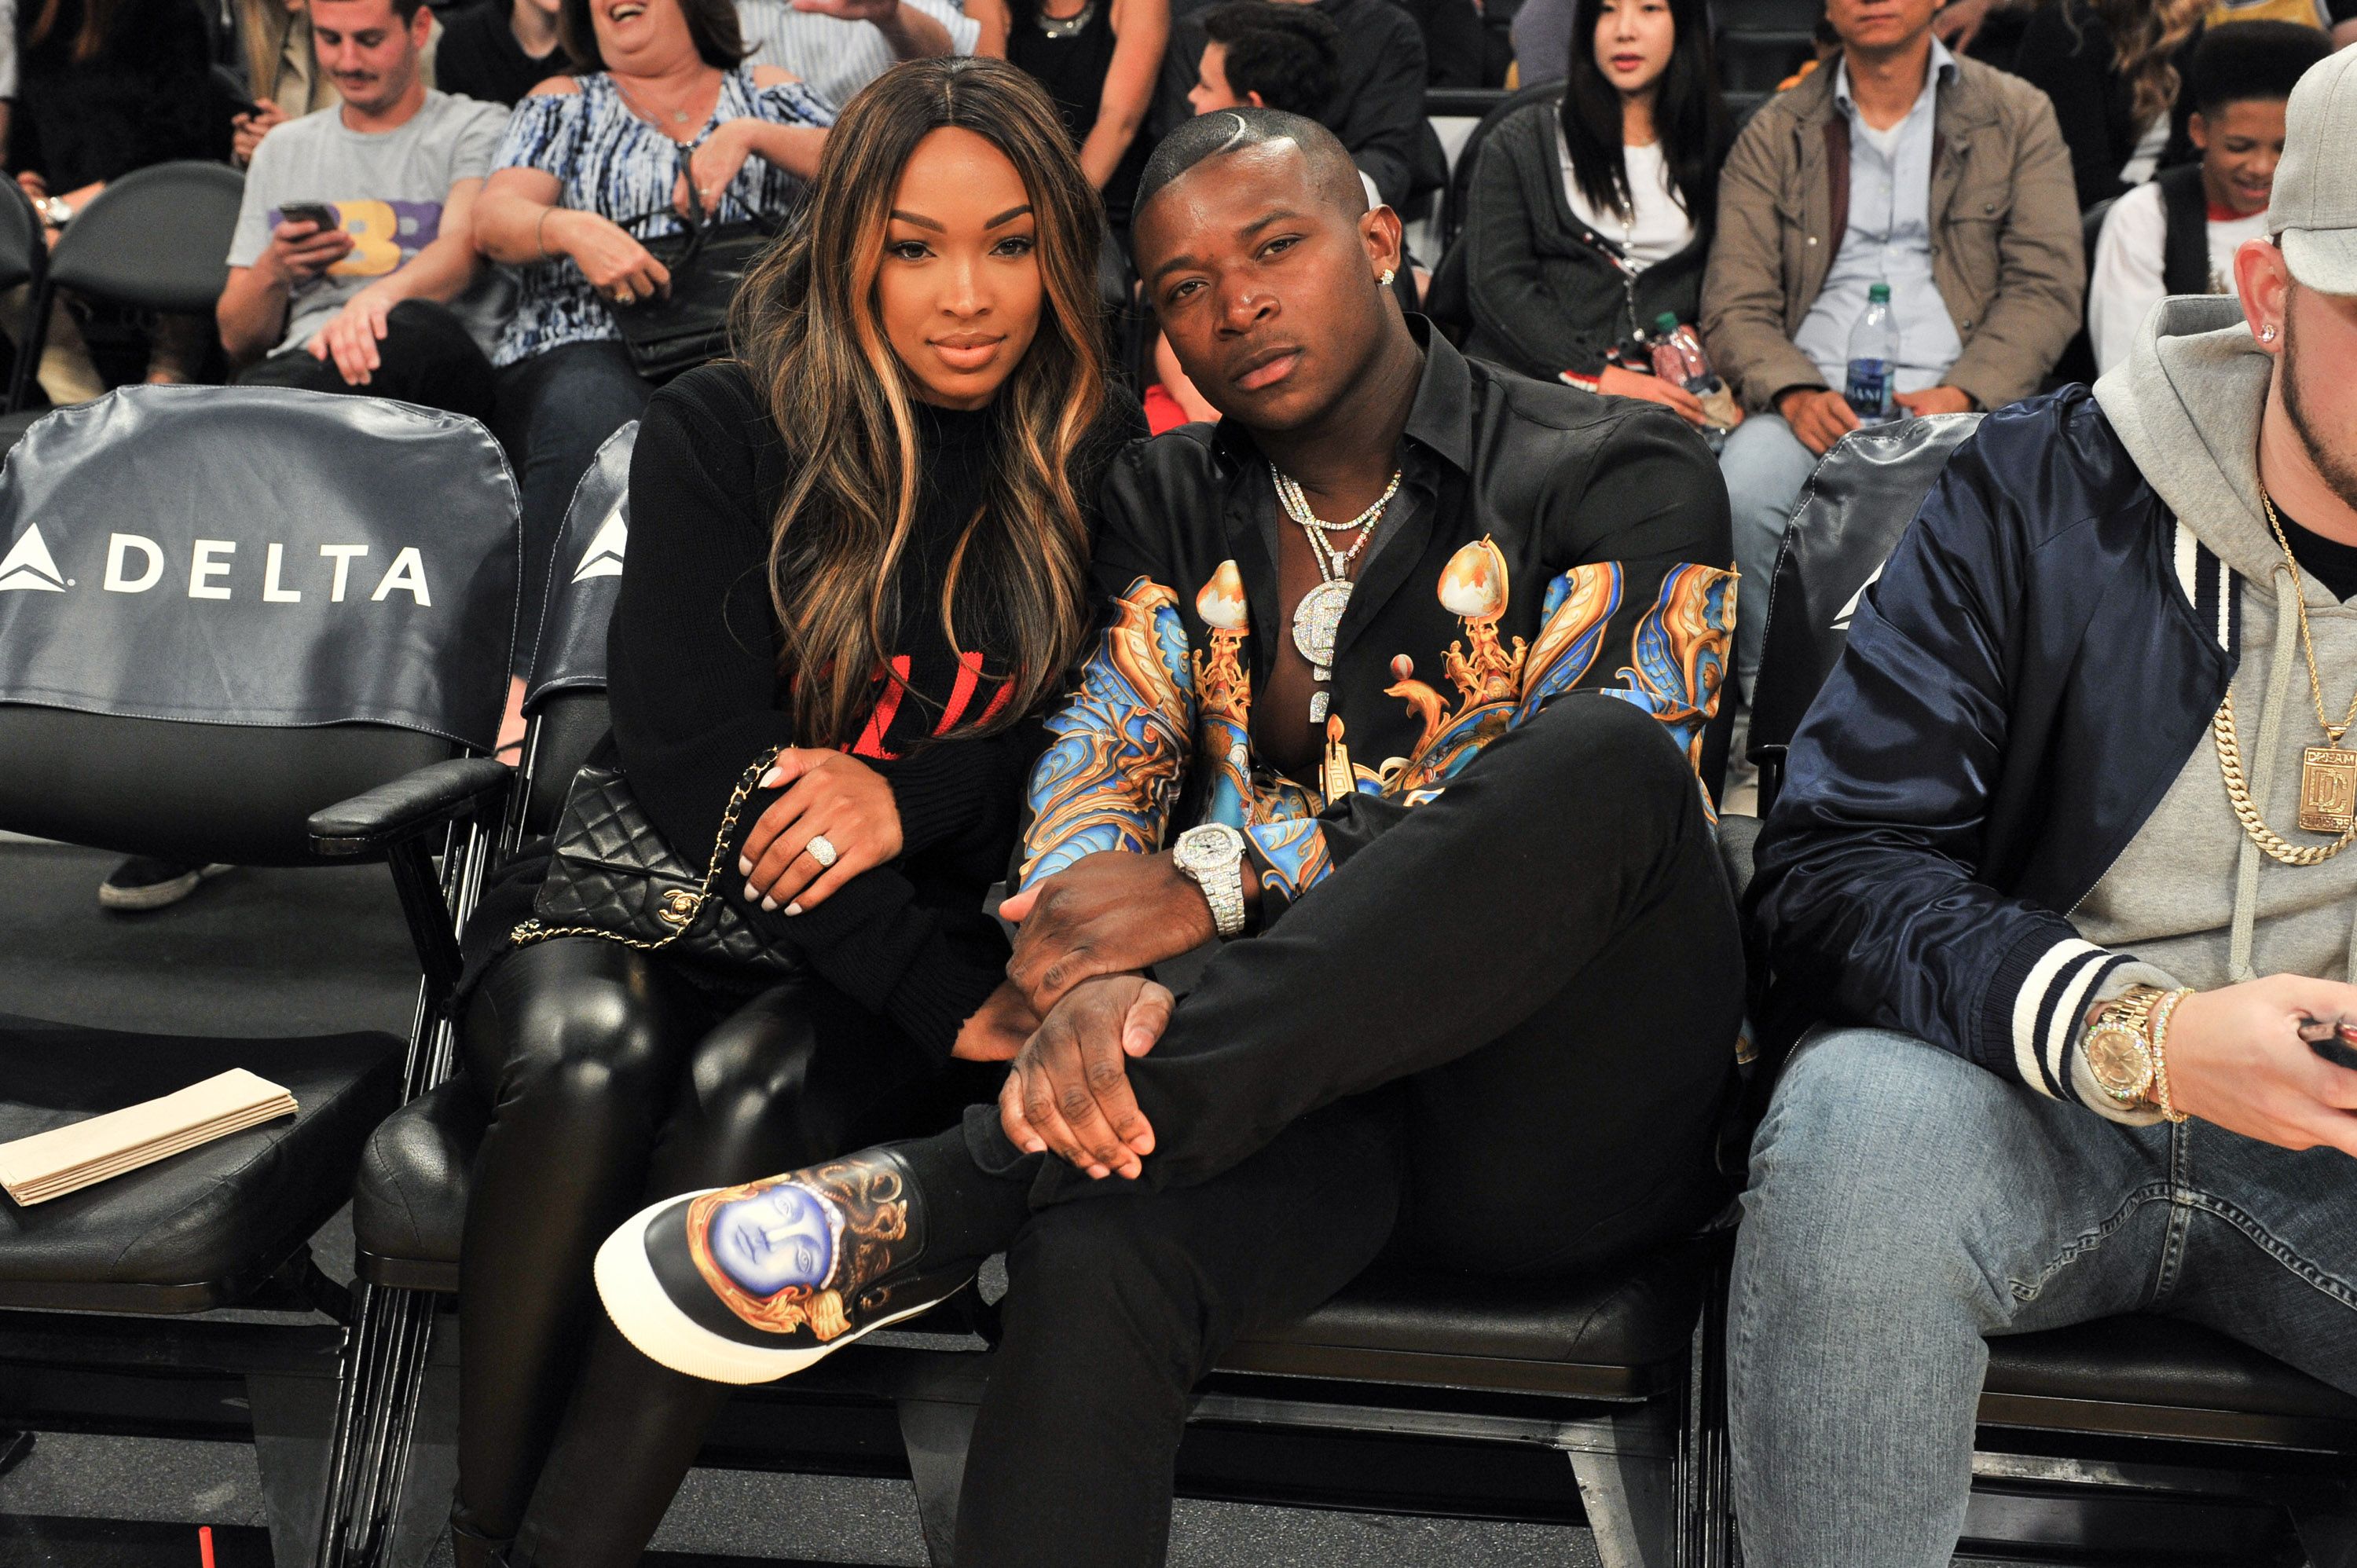 Malika Haqq and O.T. Genasis during a basketball game on Nov. 21, 2017 in California | Source: Getty Images